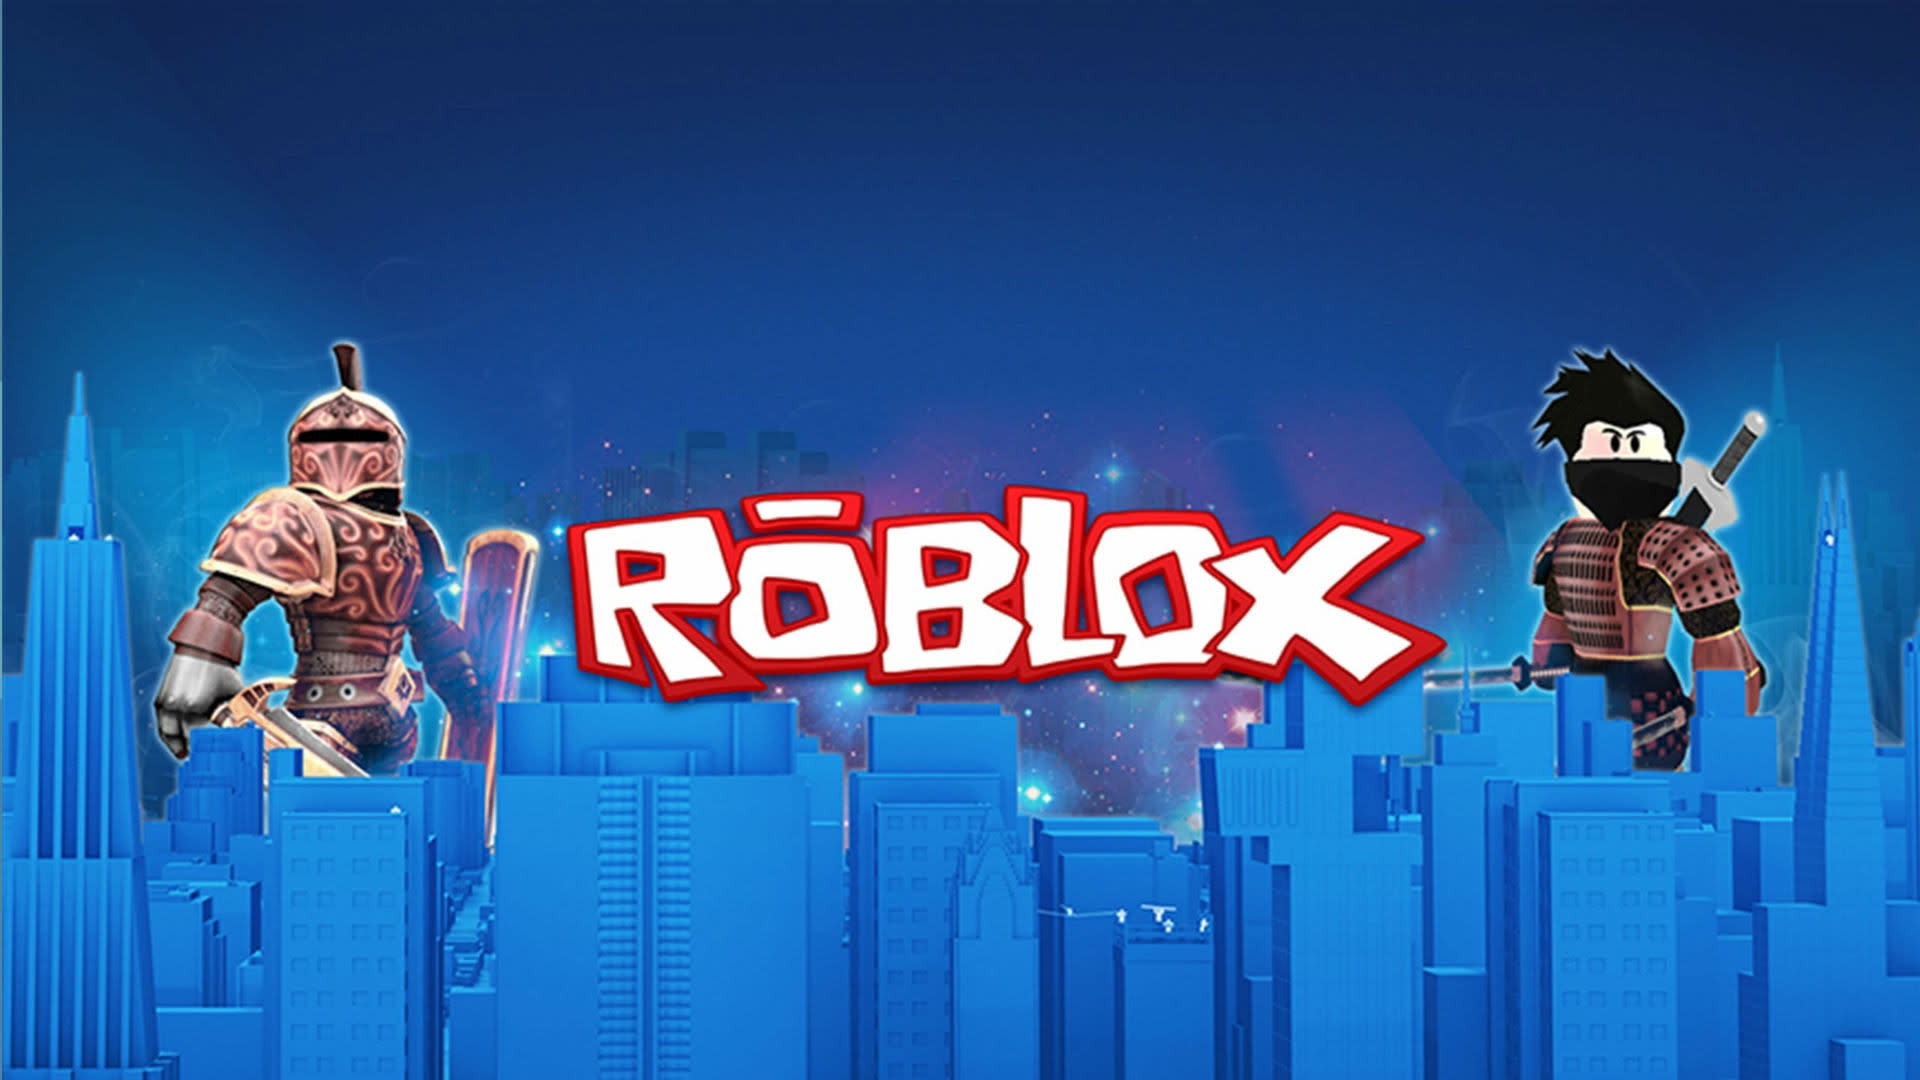 Roblox Enters Vr Space With Cross Platform Support - roblox mortal kombat 11